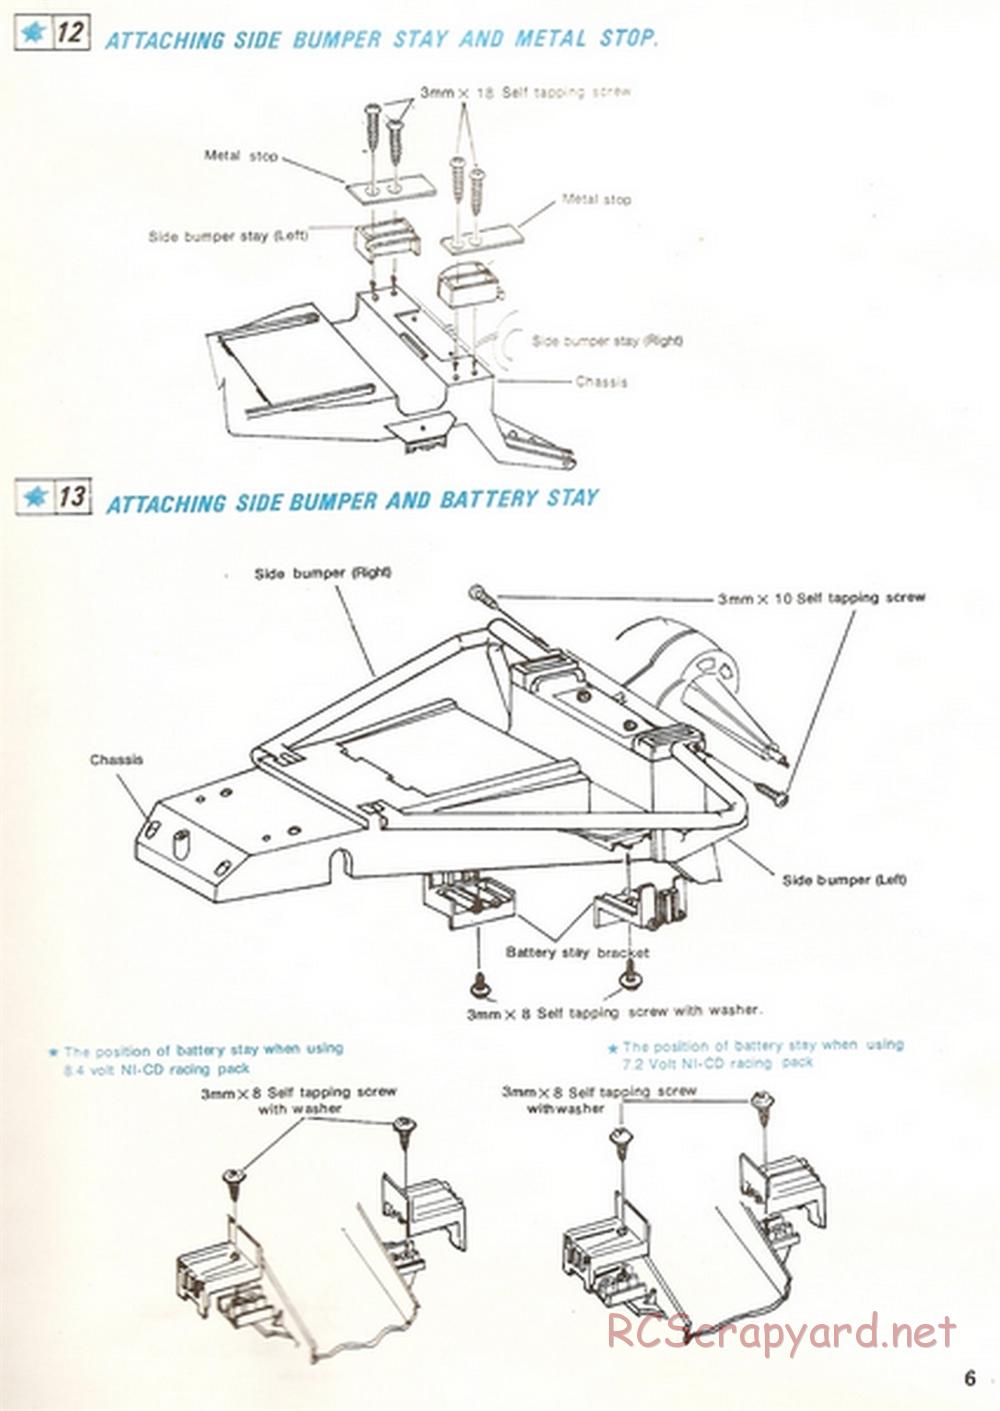 Traxxas - The Cat (1987) - Manual - Page 7